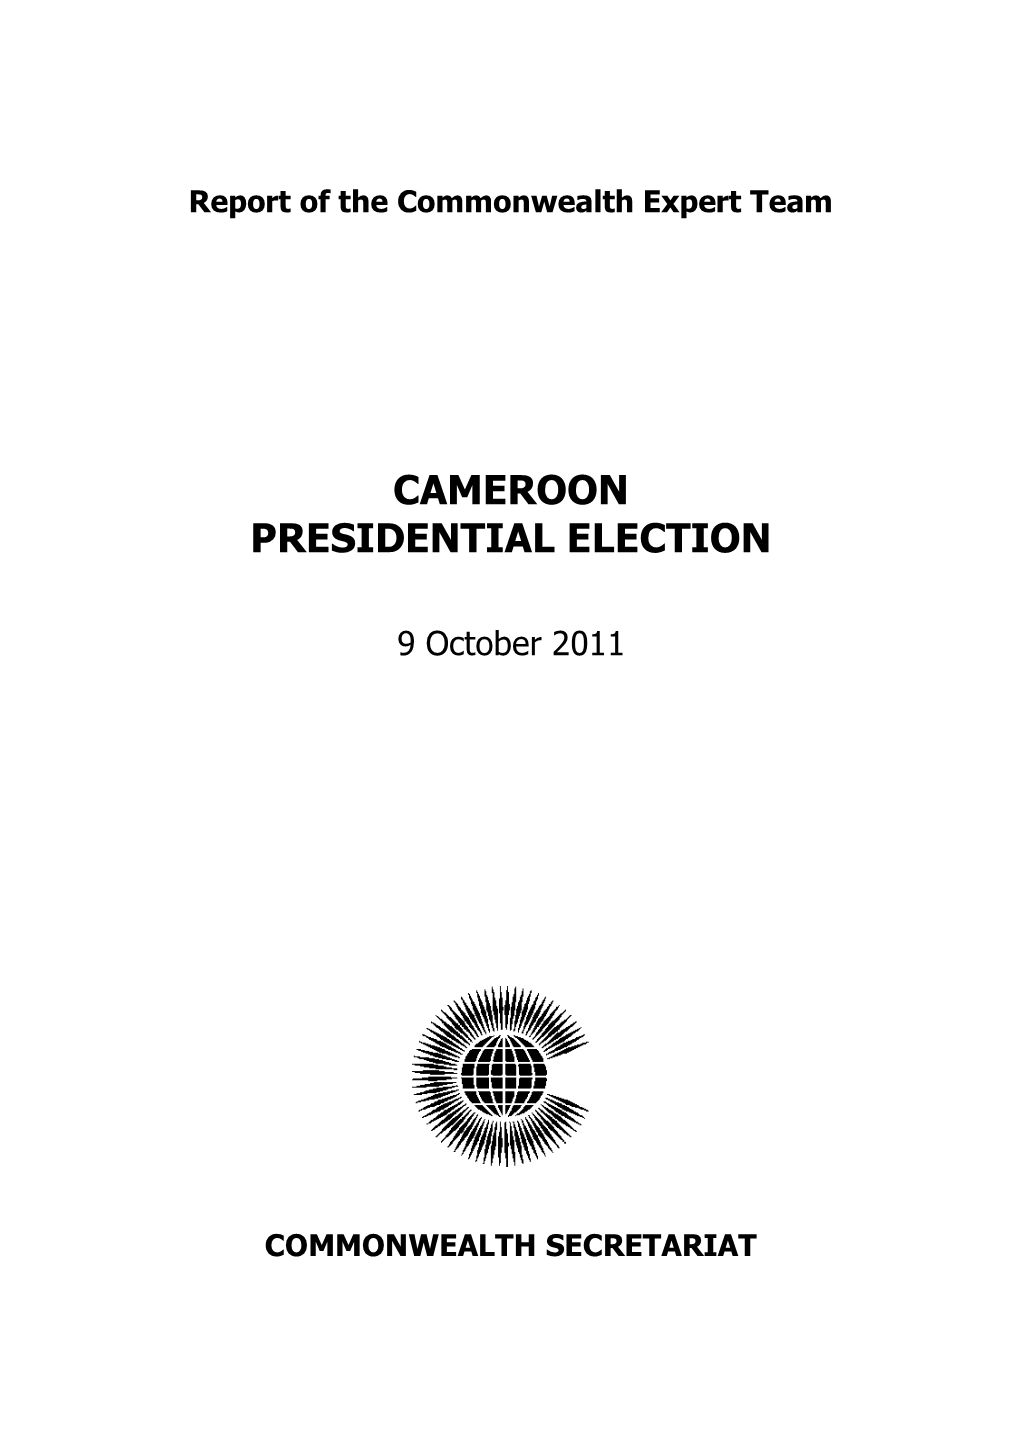 Cameroon Presidential Election